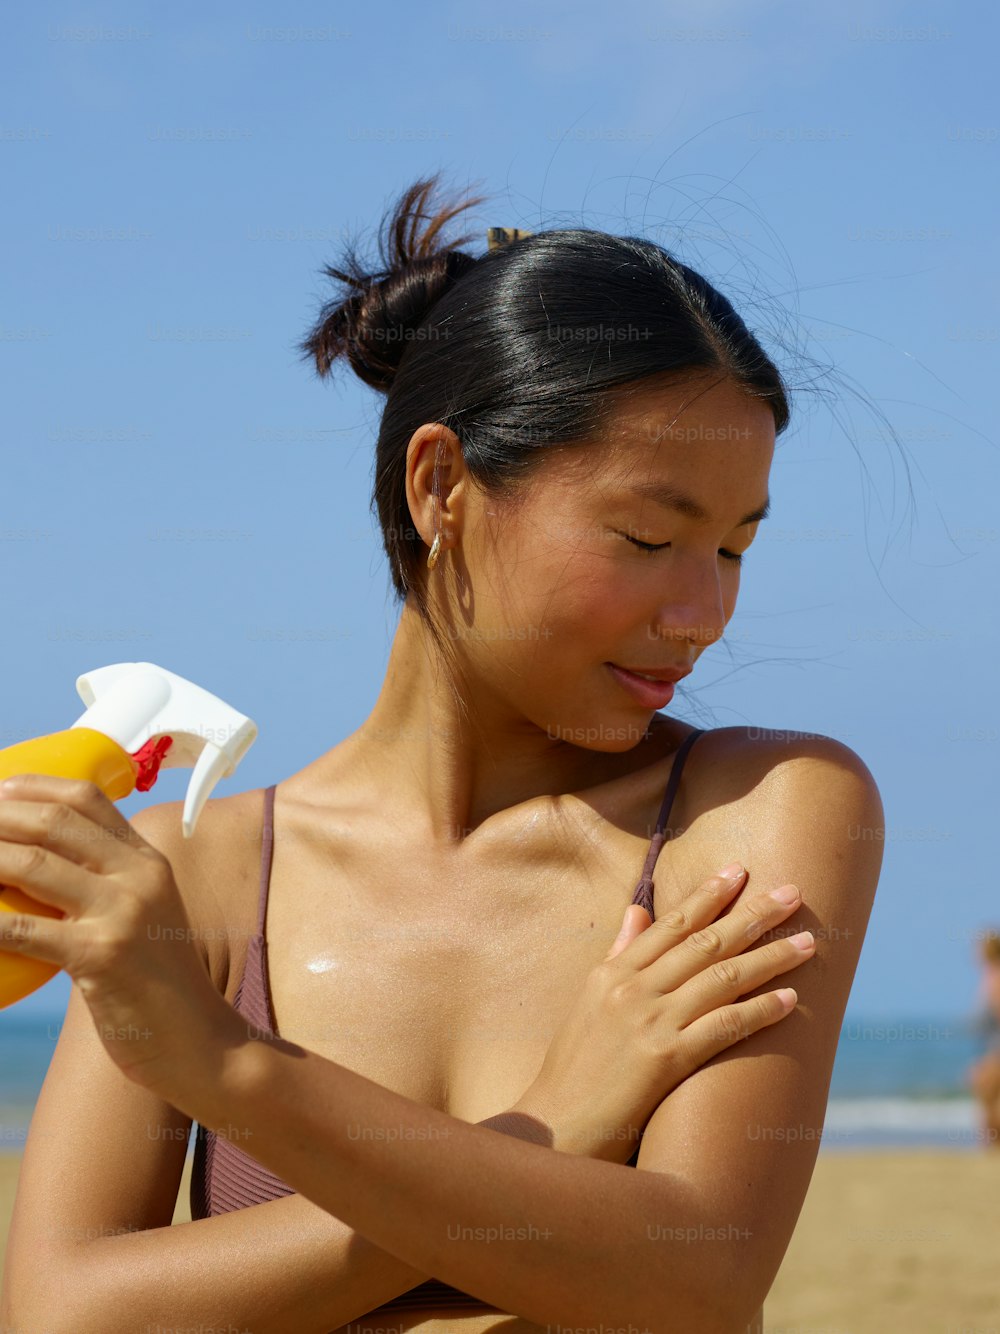 a woman holding a spray bottle and a bottle of sunscreen